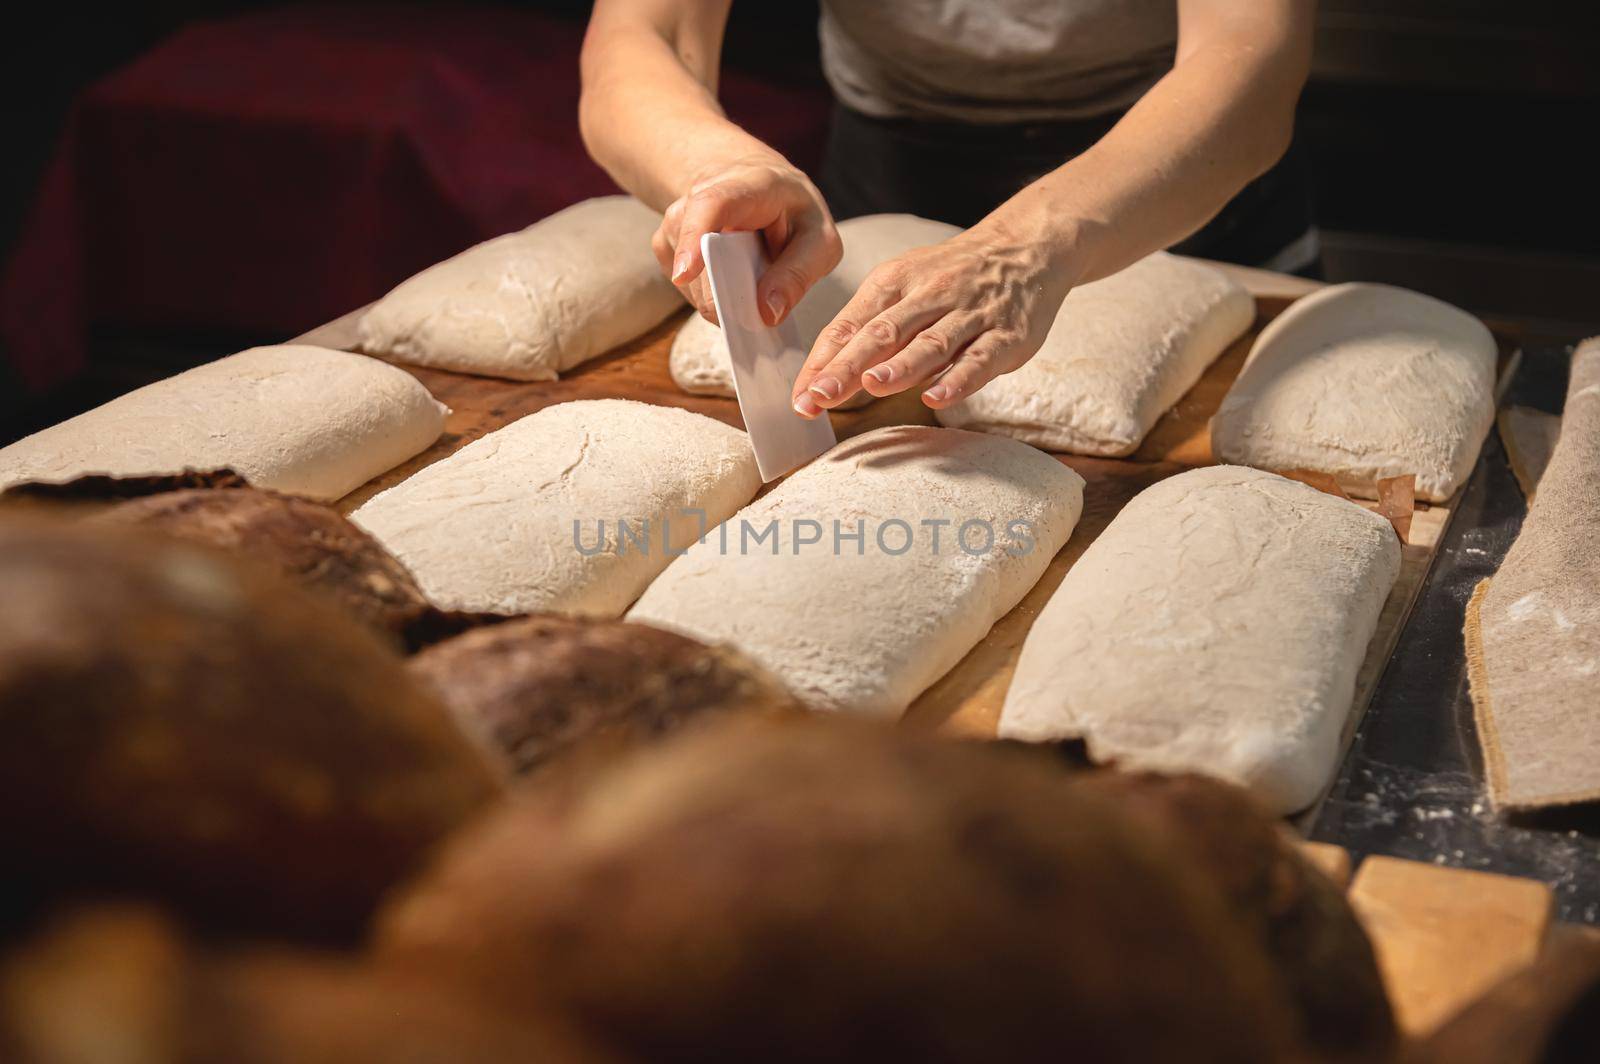 Women's hands carry out actions with raw bread. Dough before dipping into a bakery oven by yanik88